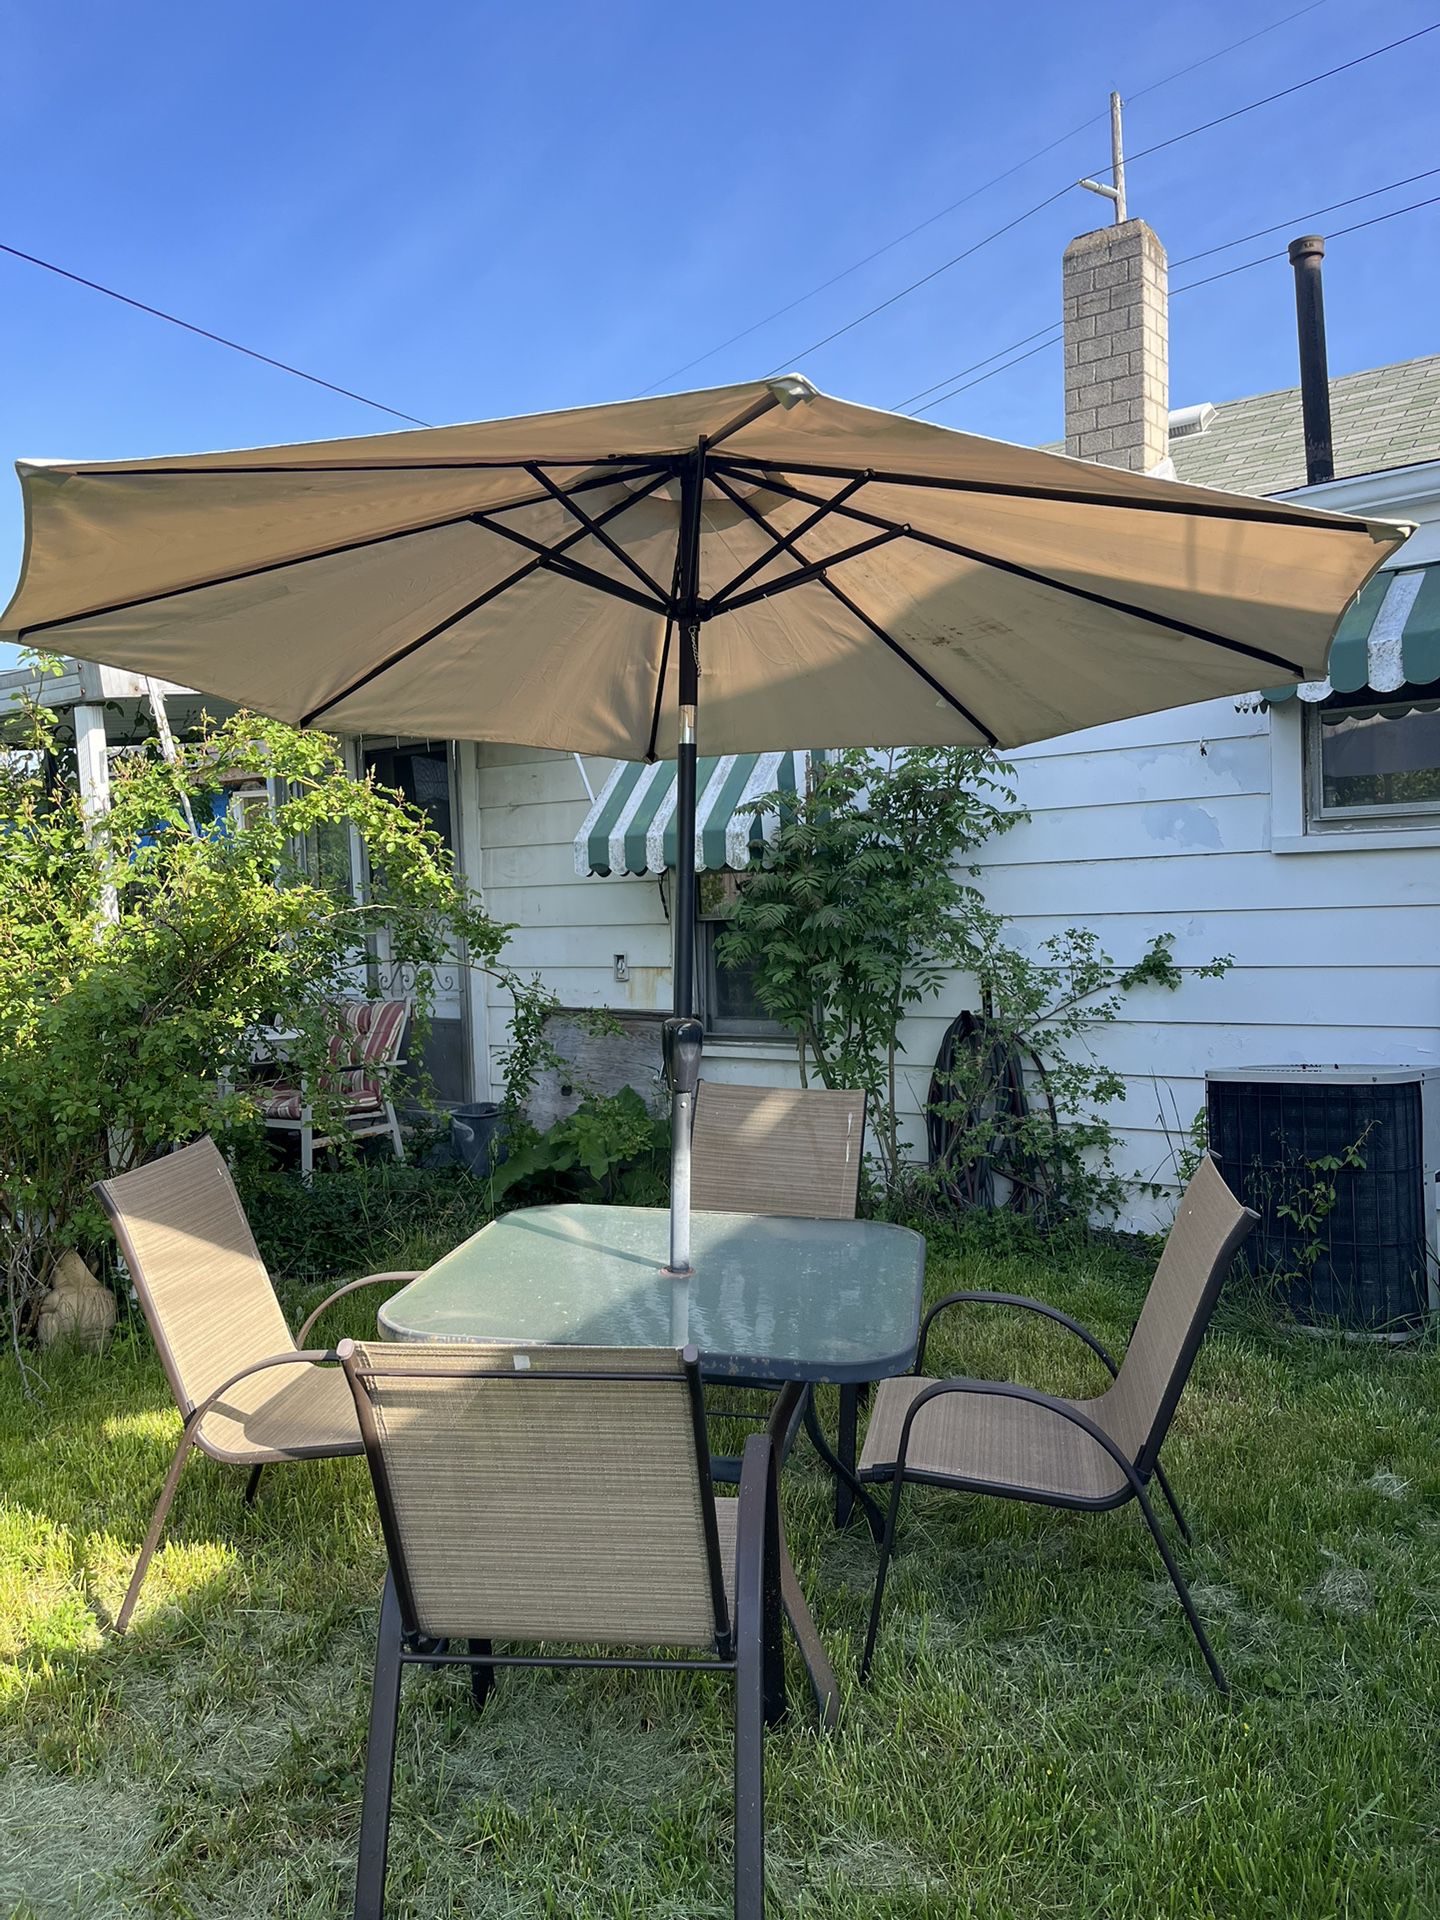 Patio Table, Umbrella, Four Chairs. 